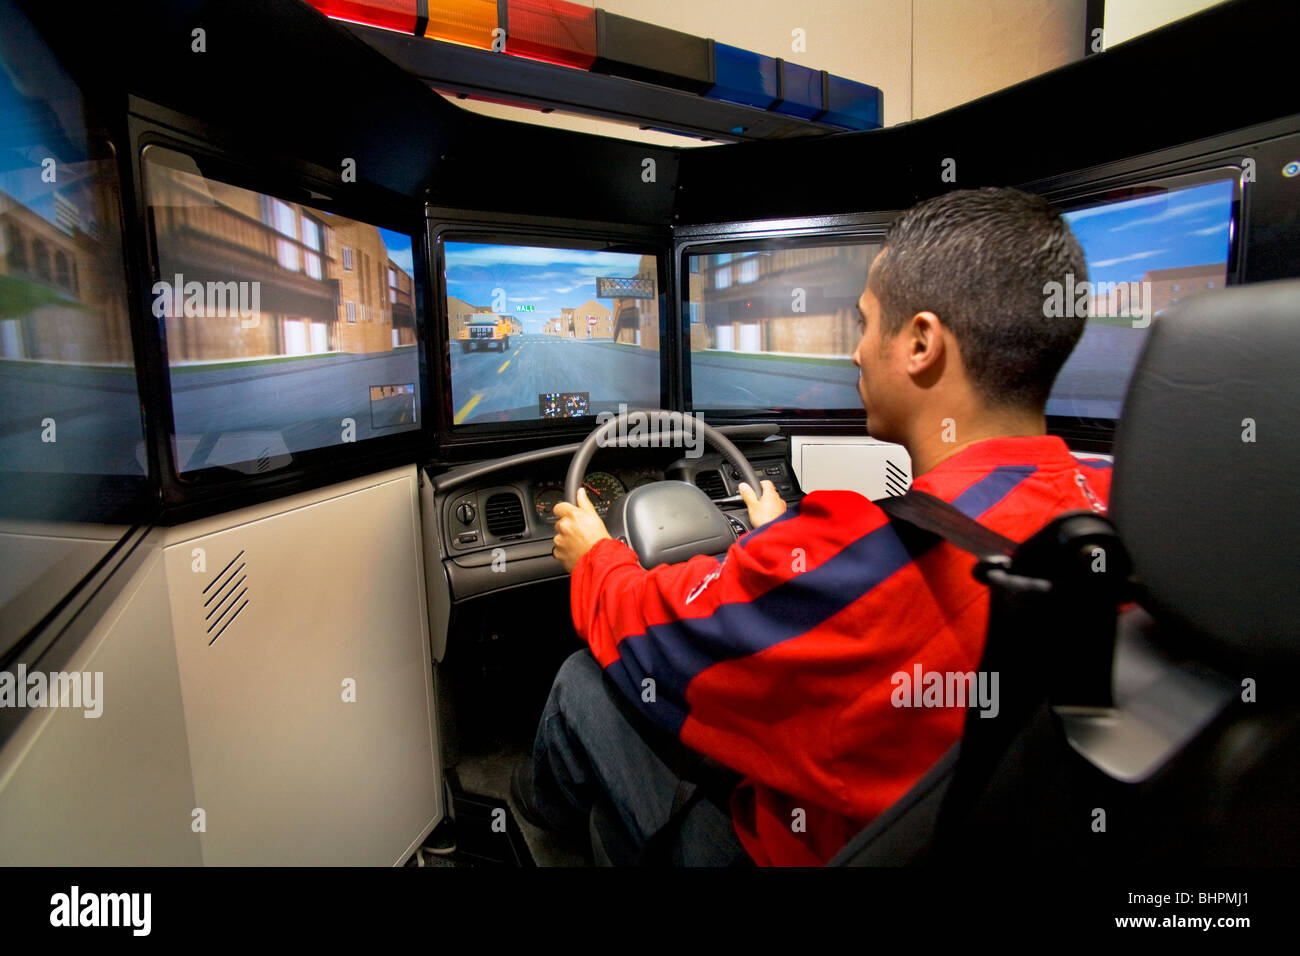 A police officer practices high speed driving skills in a patrol car simulator with a real steering wheel and seat. Stock Photo